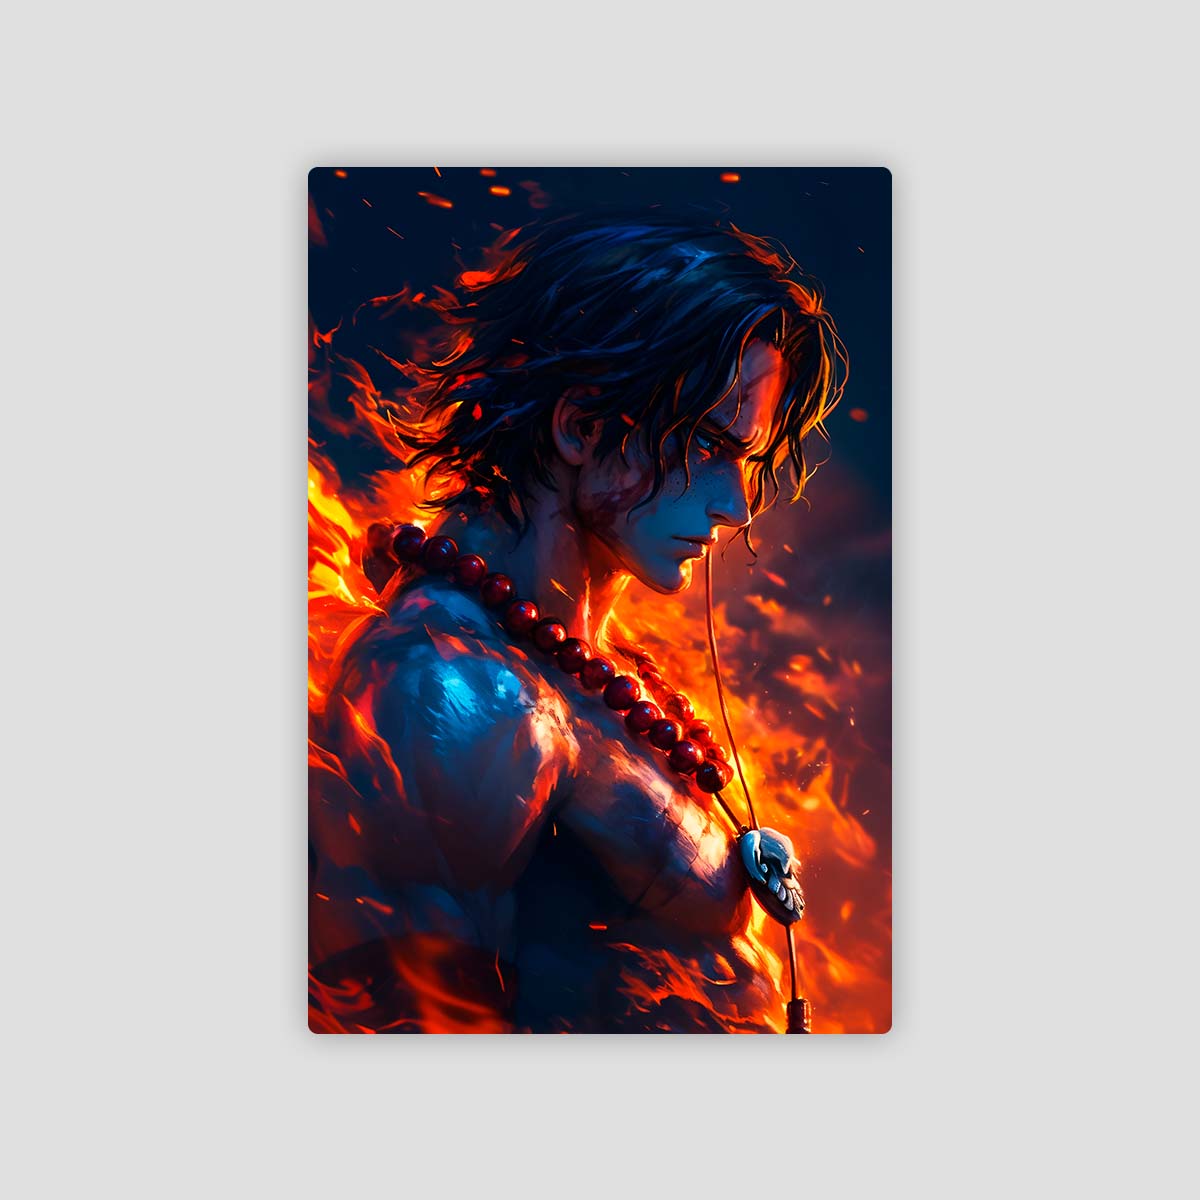 Portgas D. Ace - One Piece Metal Poster